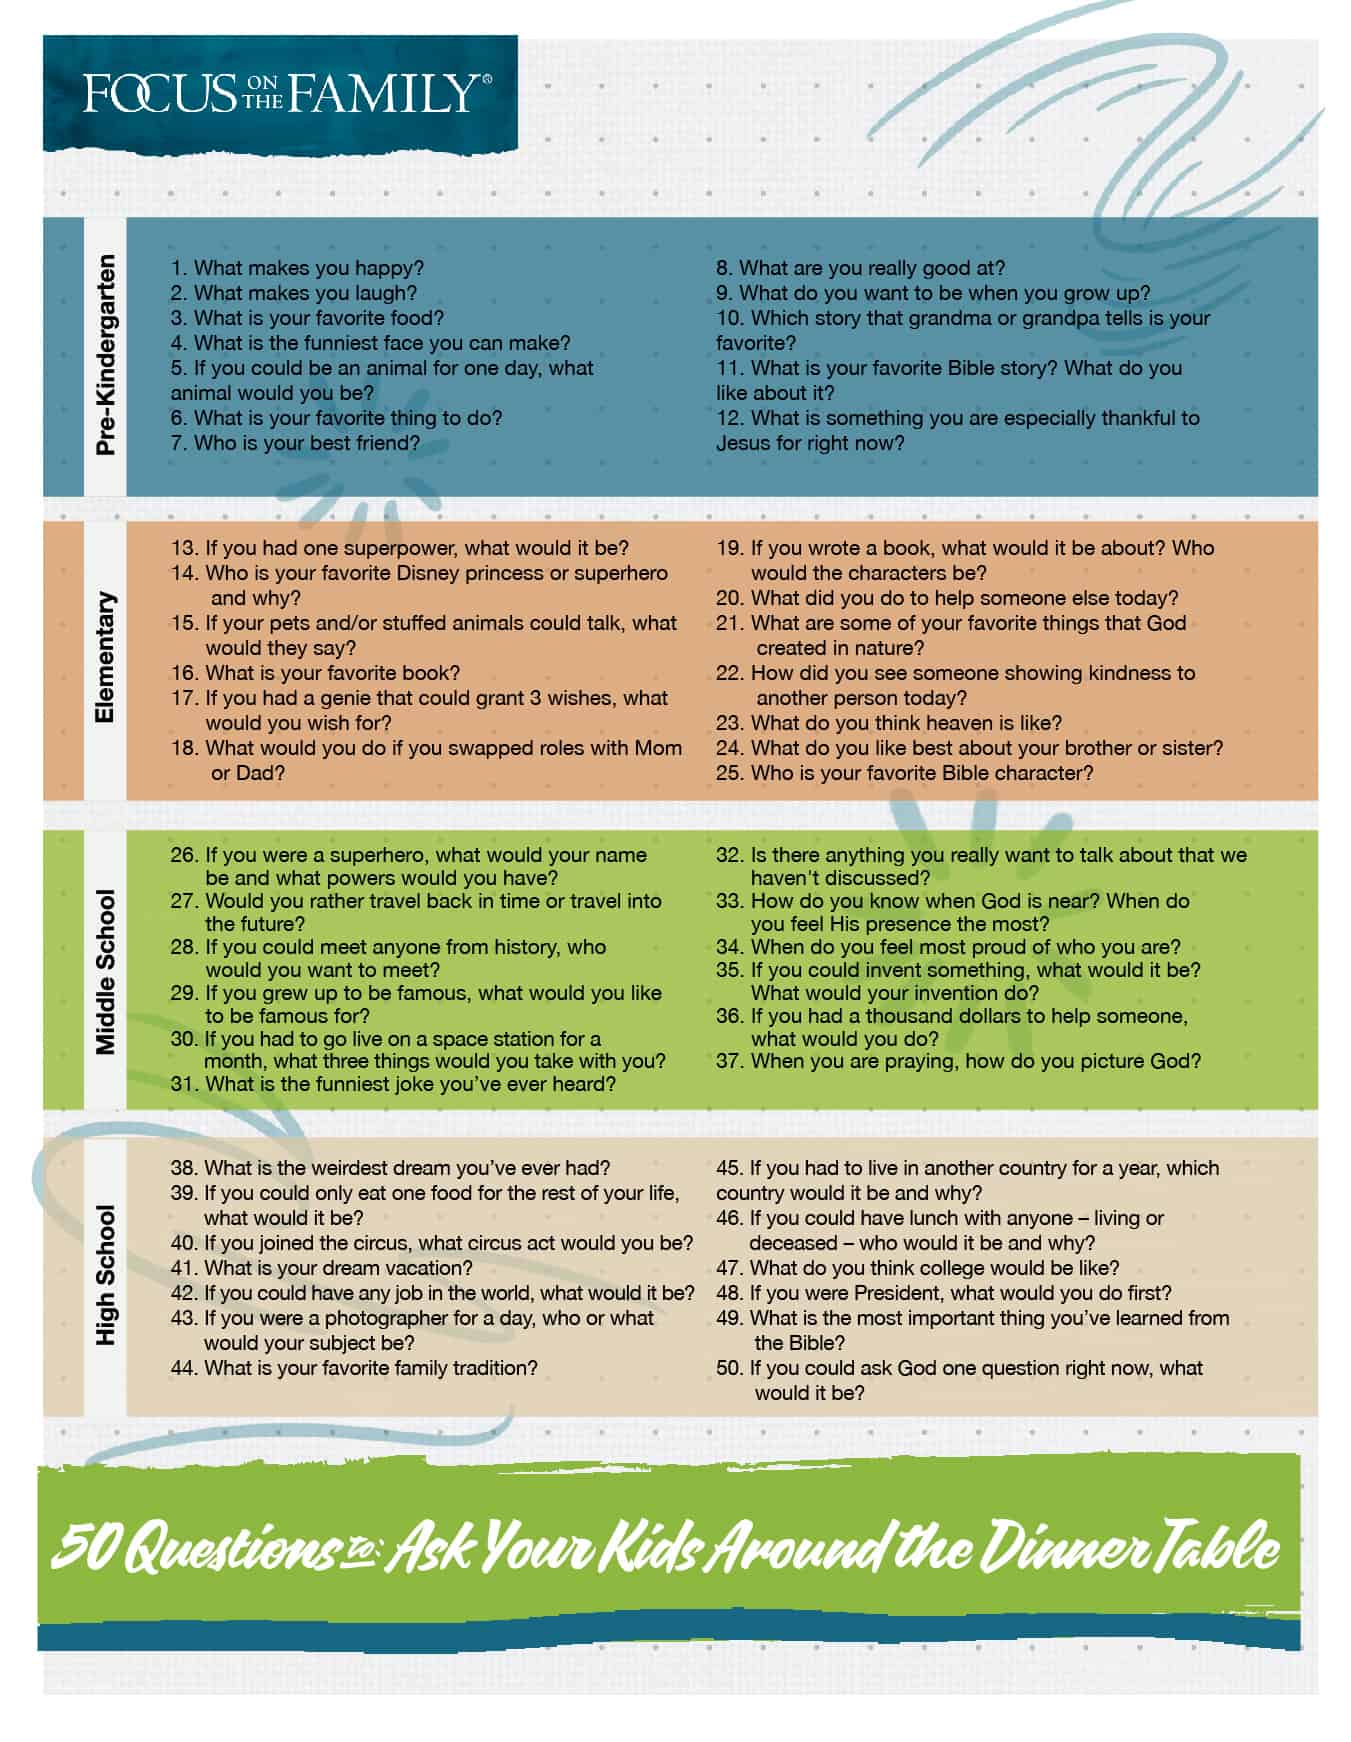 50 Questions To Ask Your Kids At The Dinner Table Focus On The Family